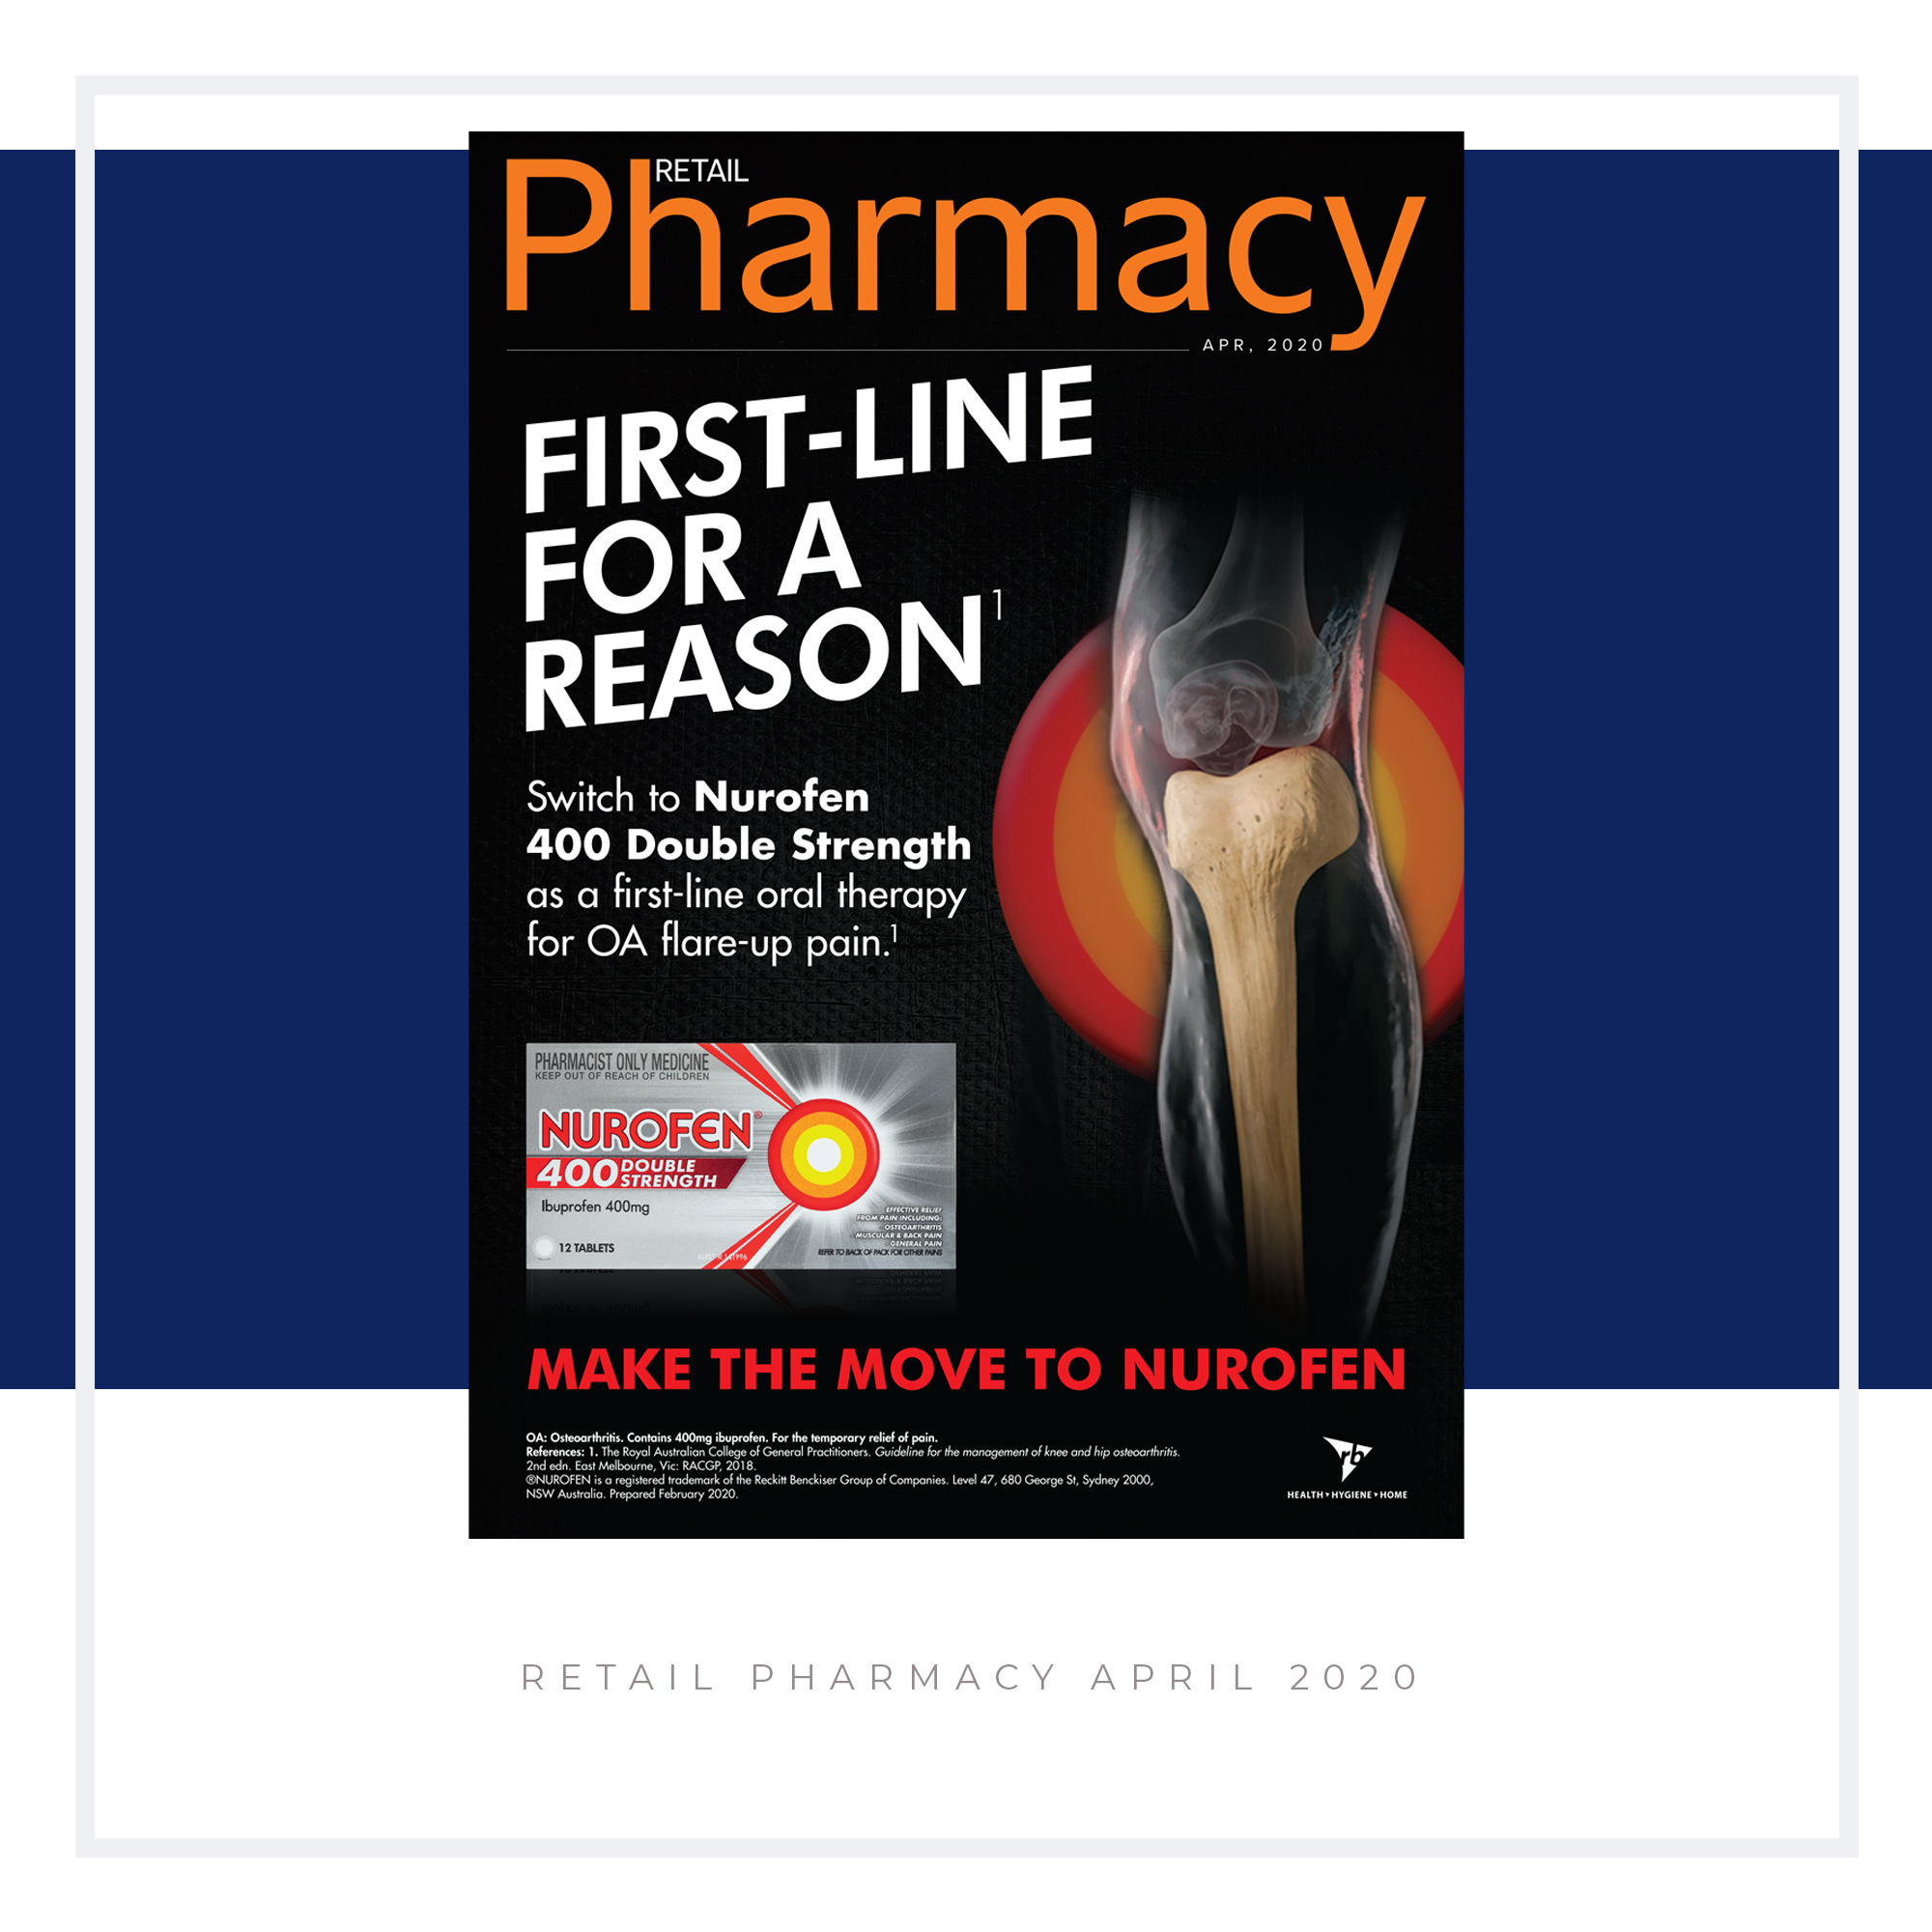 Retail Pharmacy feature – “Cutting-edge” blister packs launch